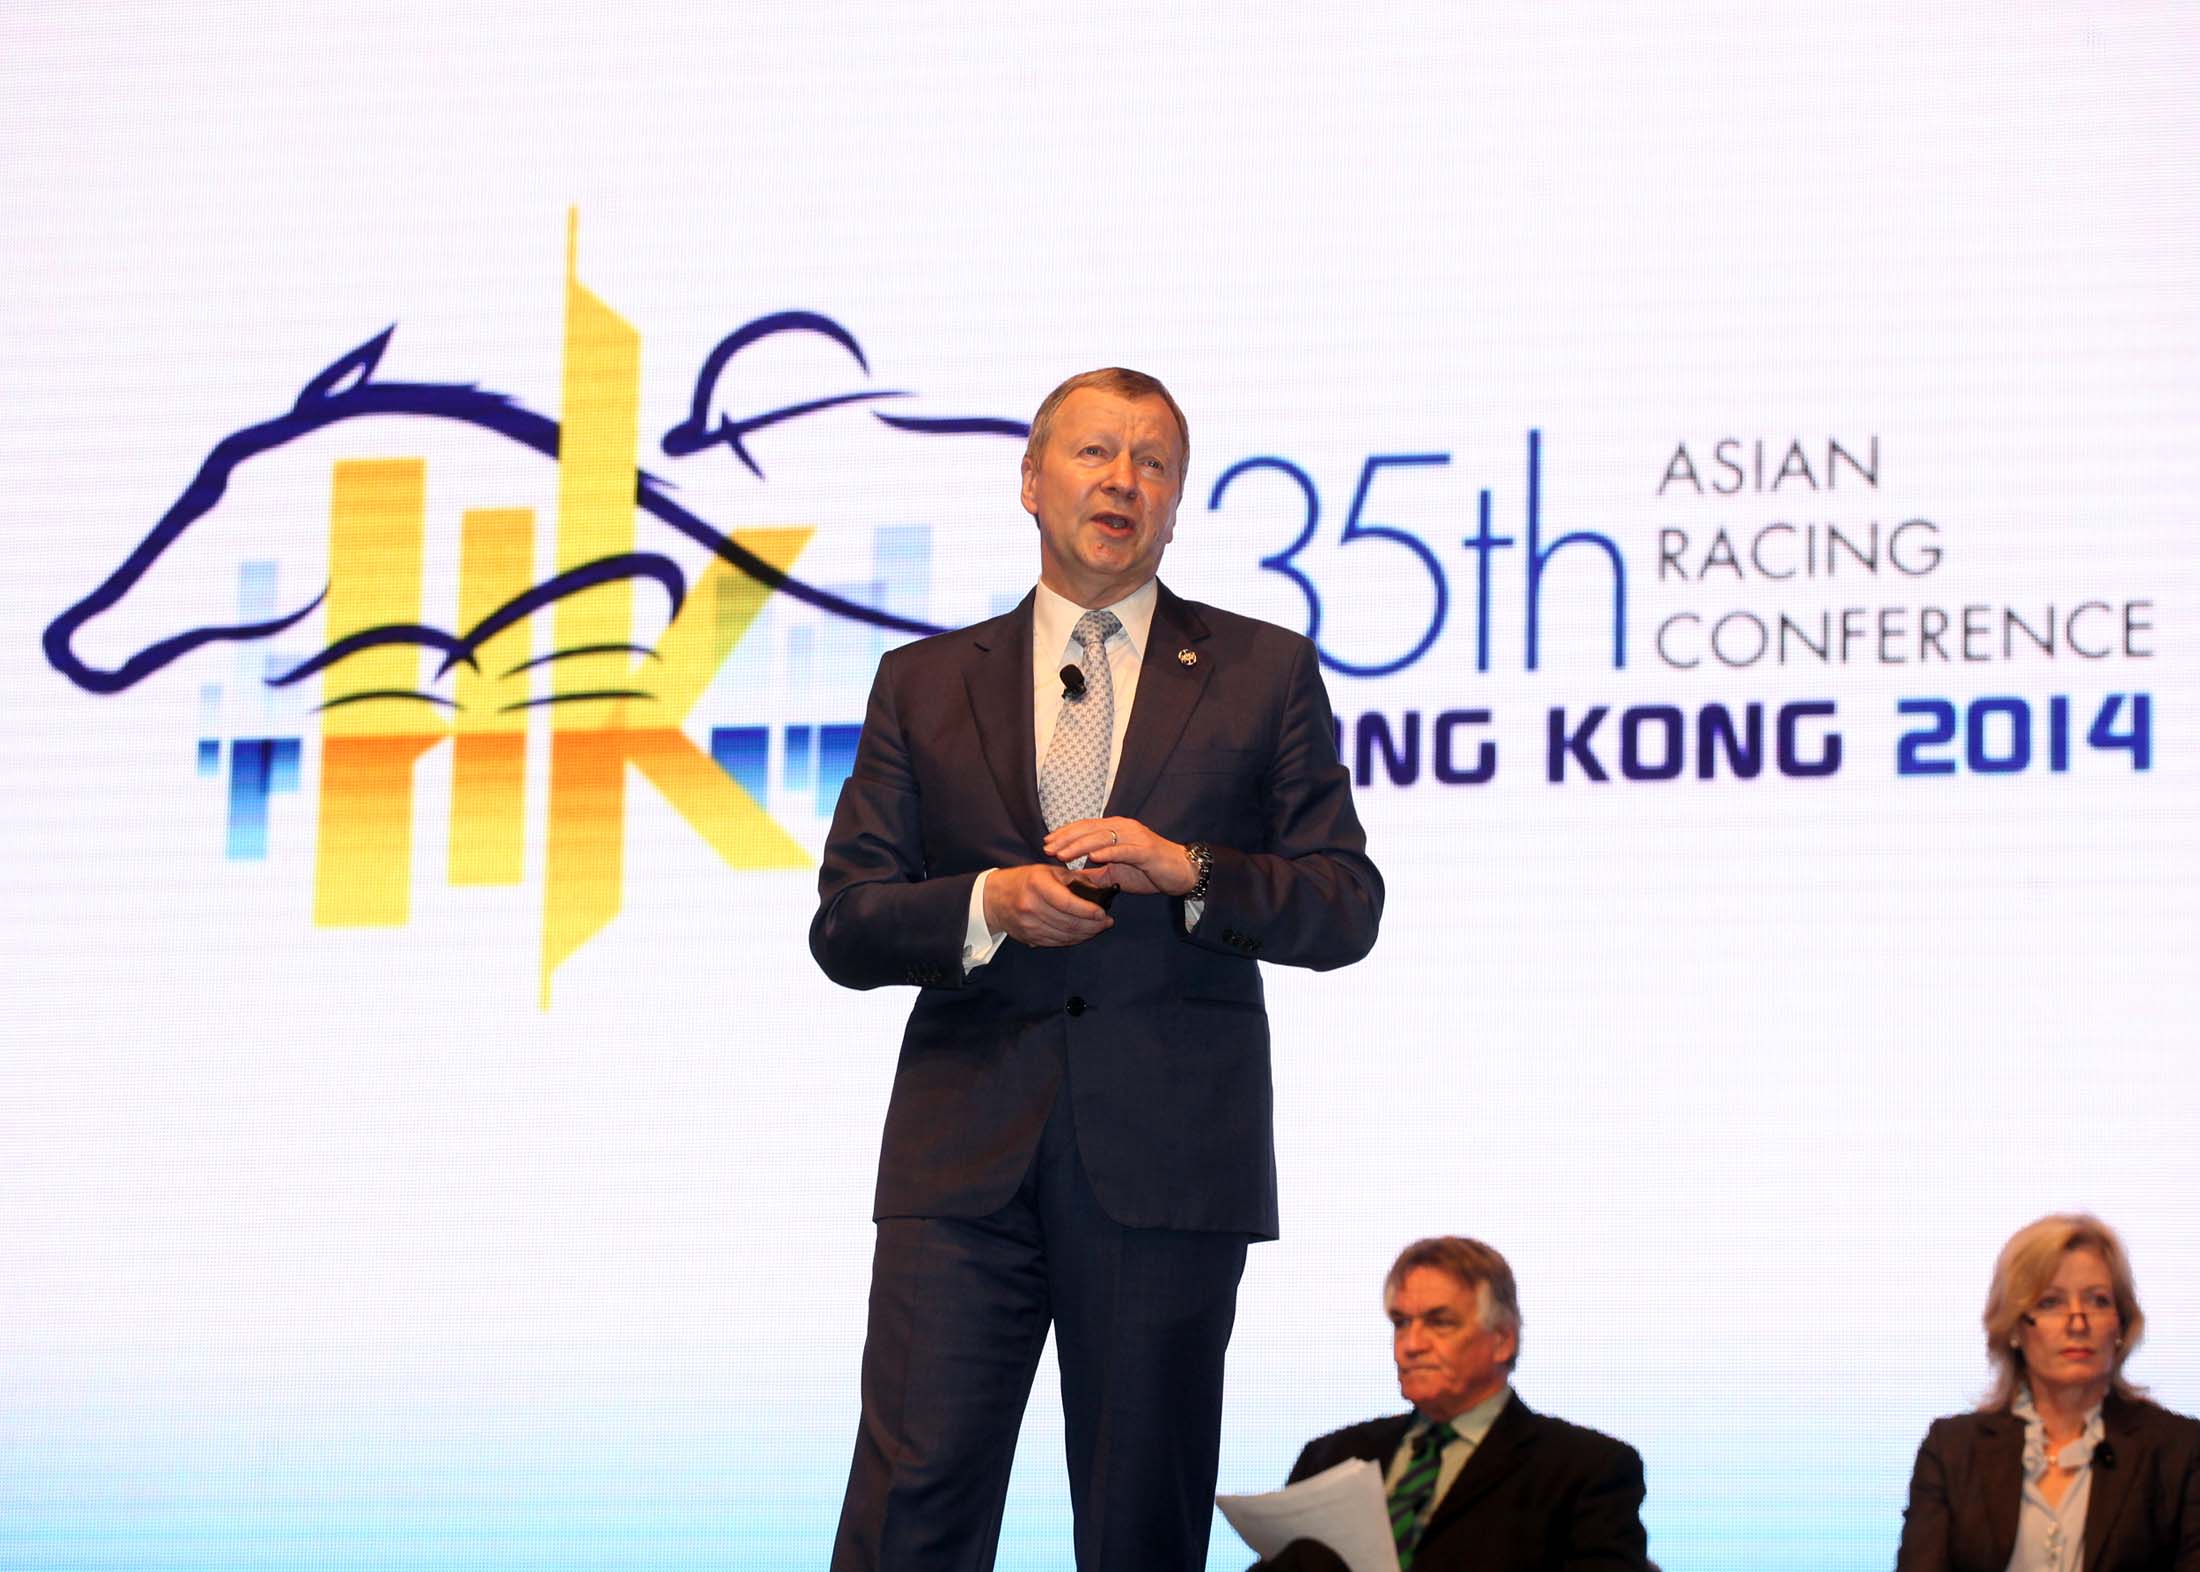 Winfried Engelbrecht-Bresges, Vice Chairman of the Asian Racing Federation and Chief Executive Officer of the Hong Kong Jockey Club, speaks at the conference’s first plenary session, “Racing’s lifeblood – the future landscape for wagering” today.